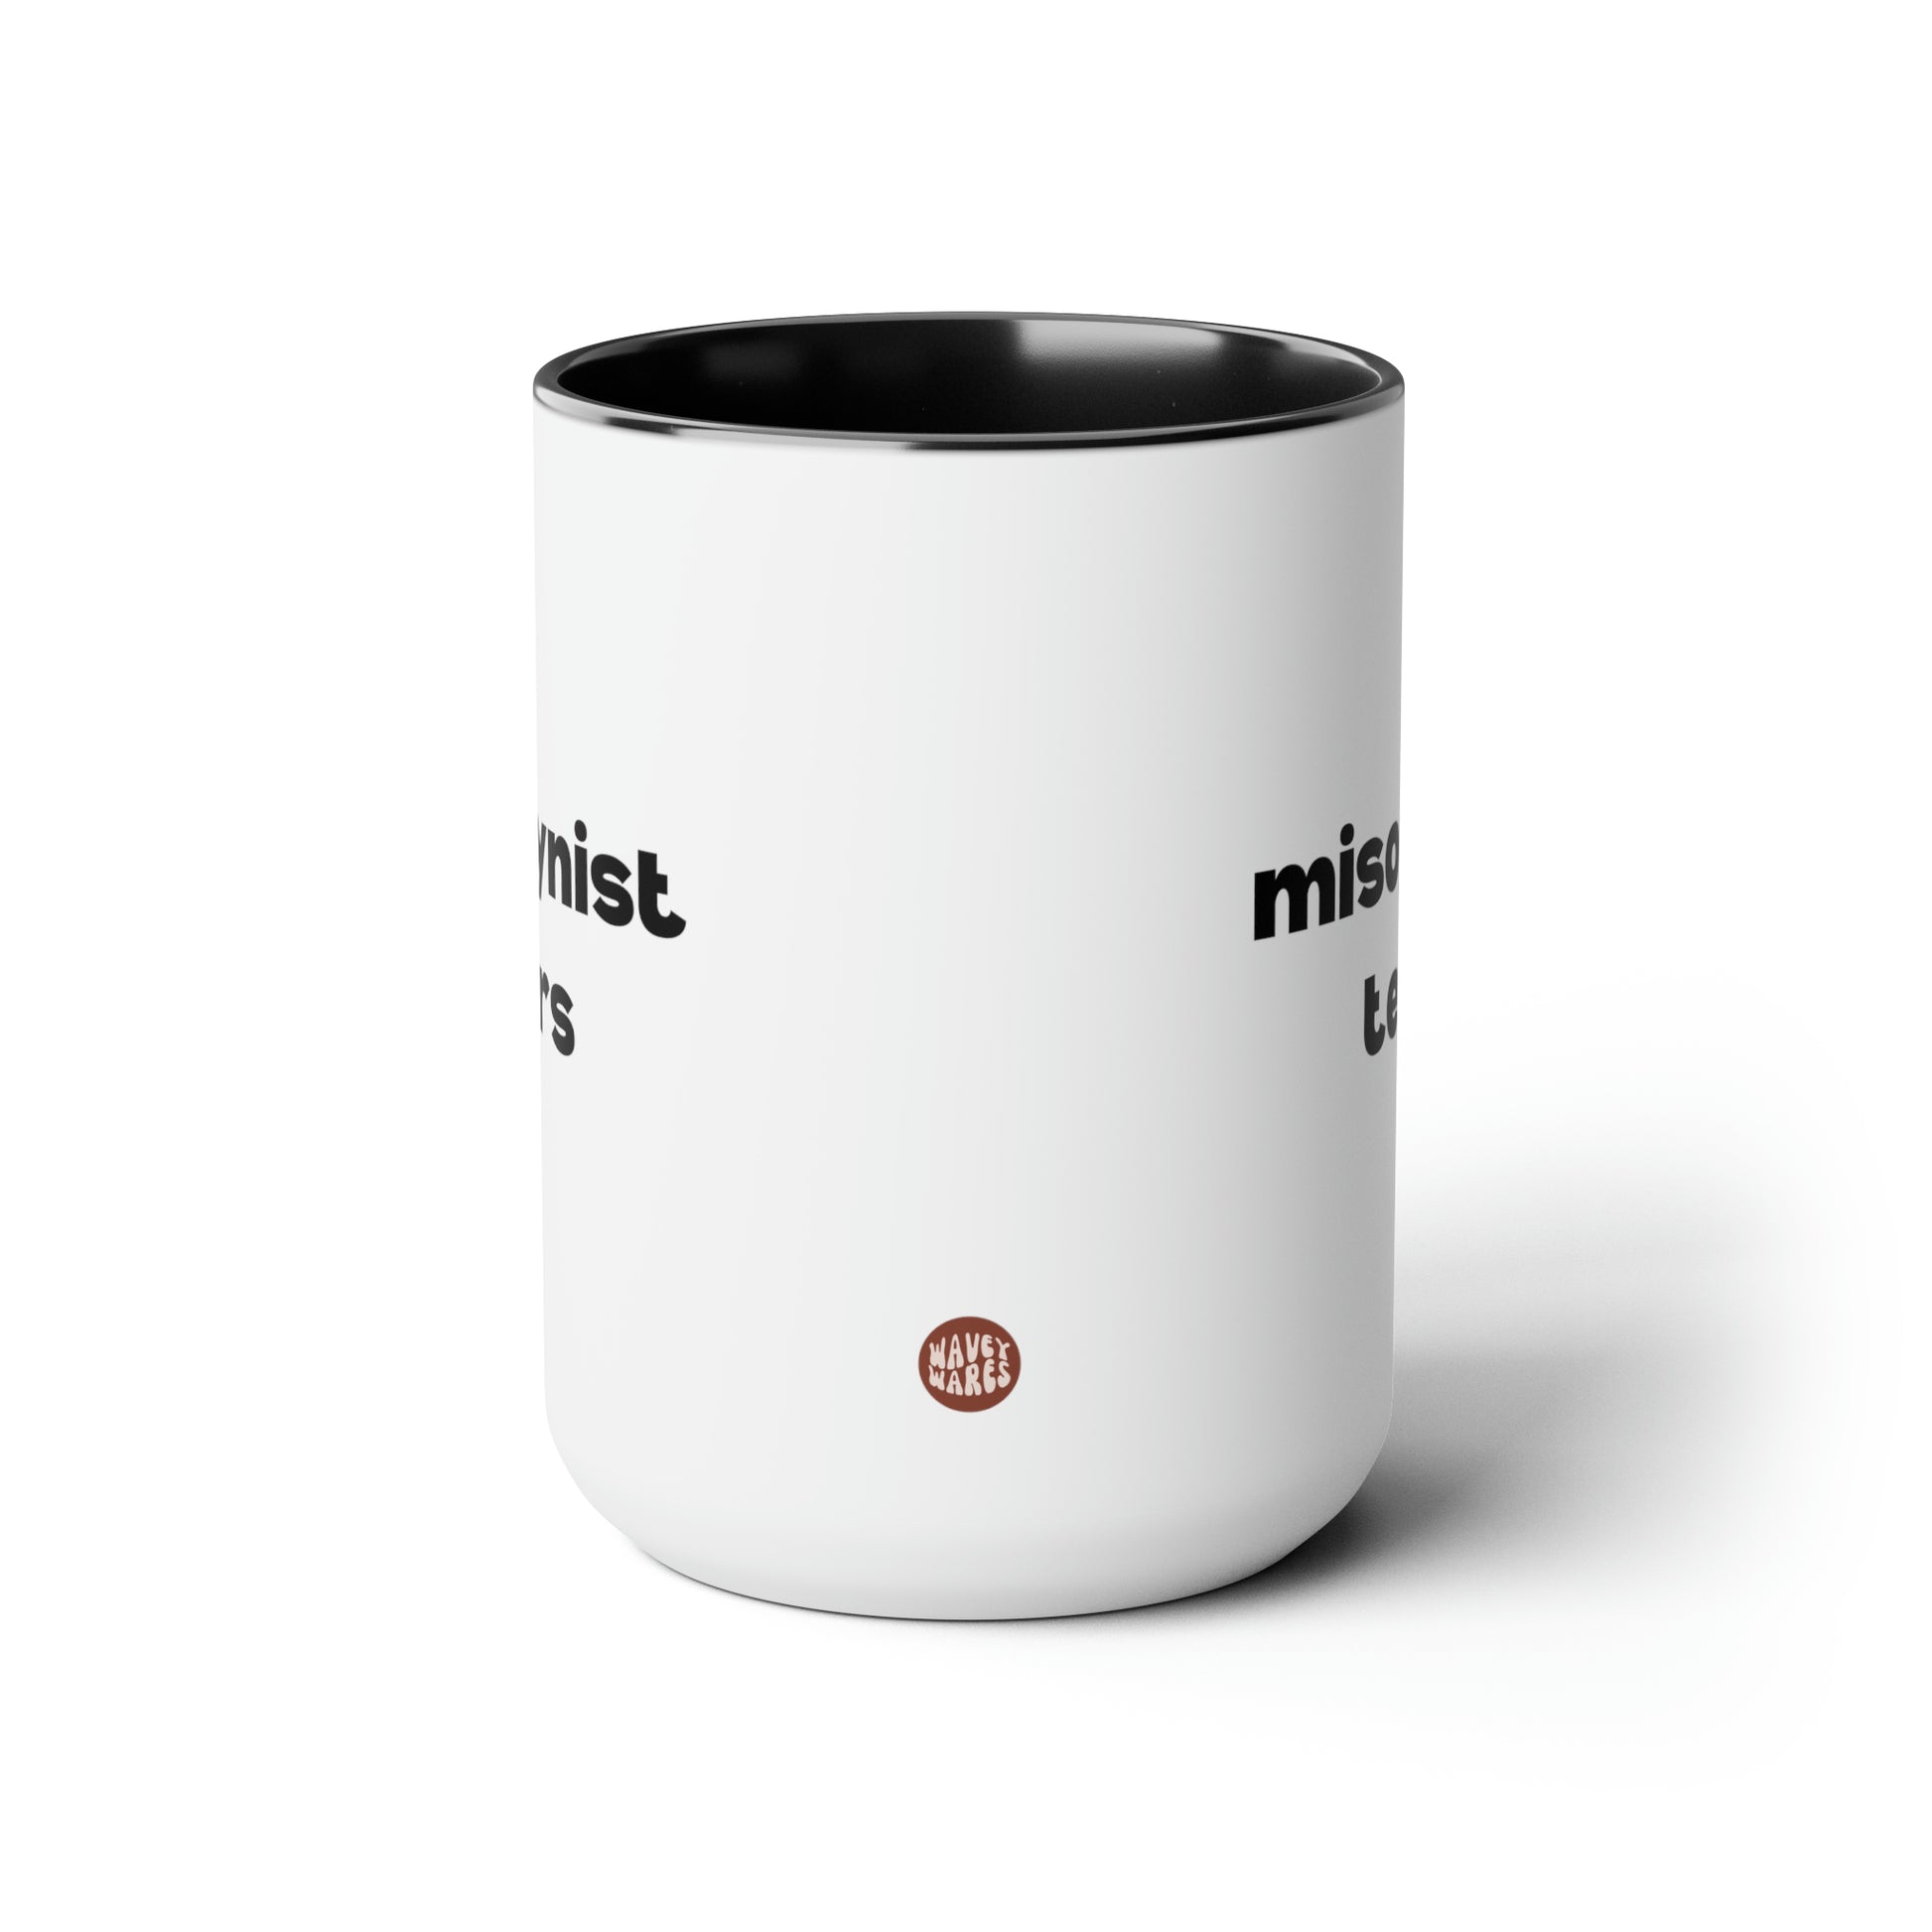 Misogynist Tears 15oz white with black accent funny large coffee mug gift for feminist quote feminism she persisted smash the patriarchy waveywares wavey wares wavywares wavy wares side